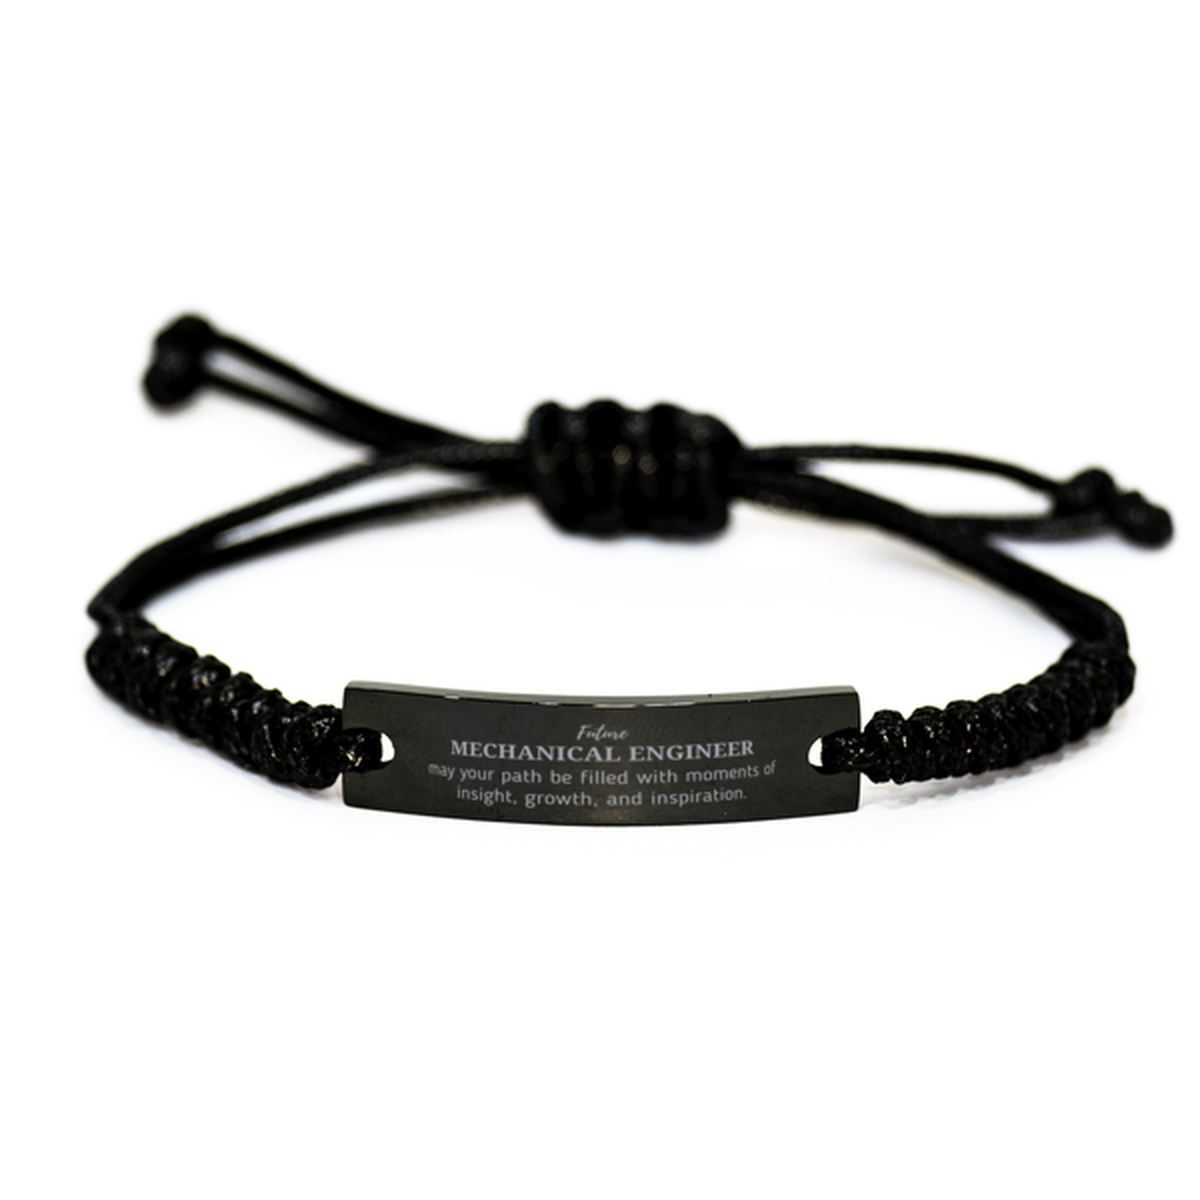 Future Mechanical Engineer Gifts, May your path be filled with moments of insight, Graduation Gifts for New Mechanical Engineer, Christmas Unique Black Rope Bracelet For Men, Women, Friends